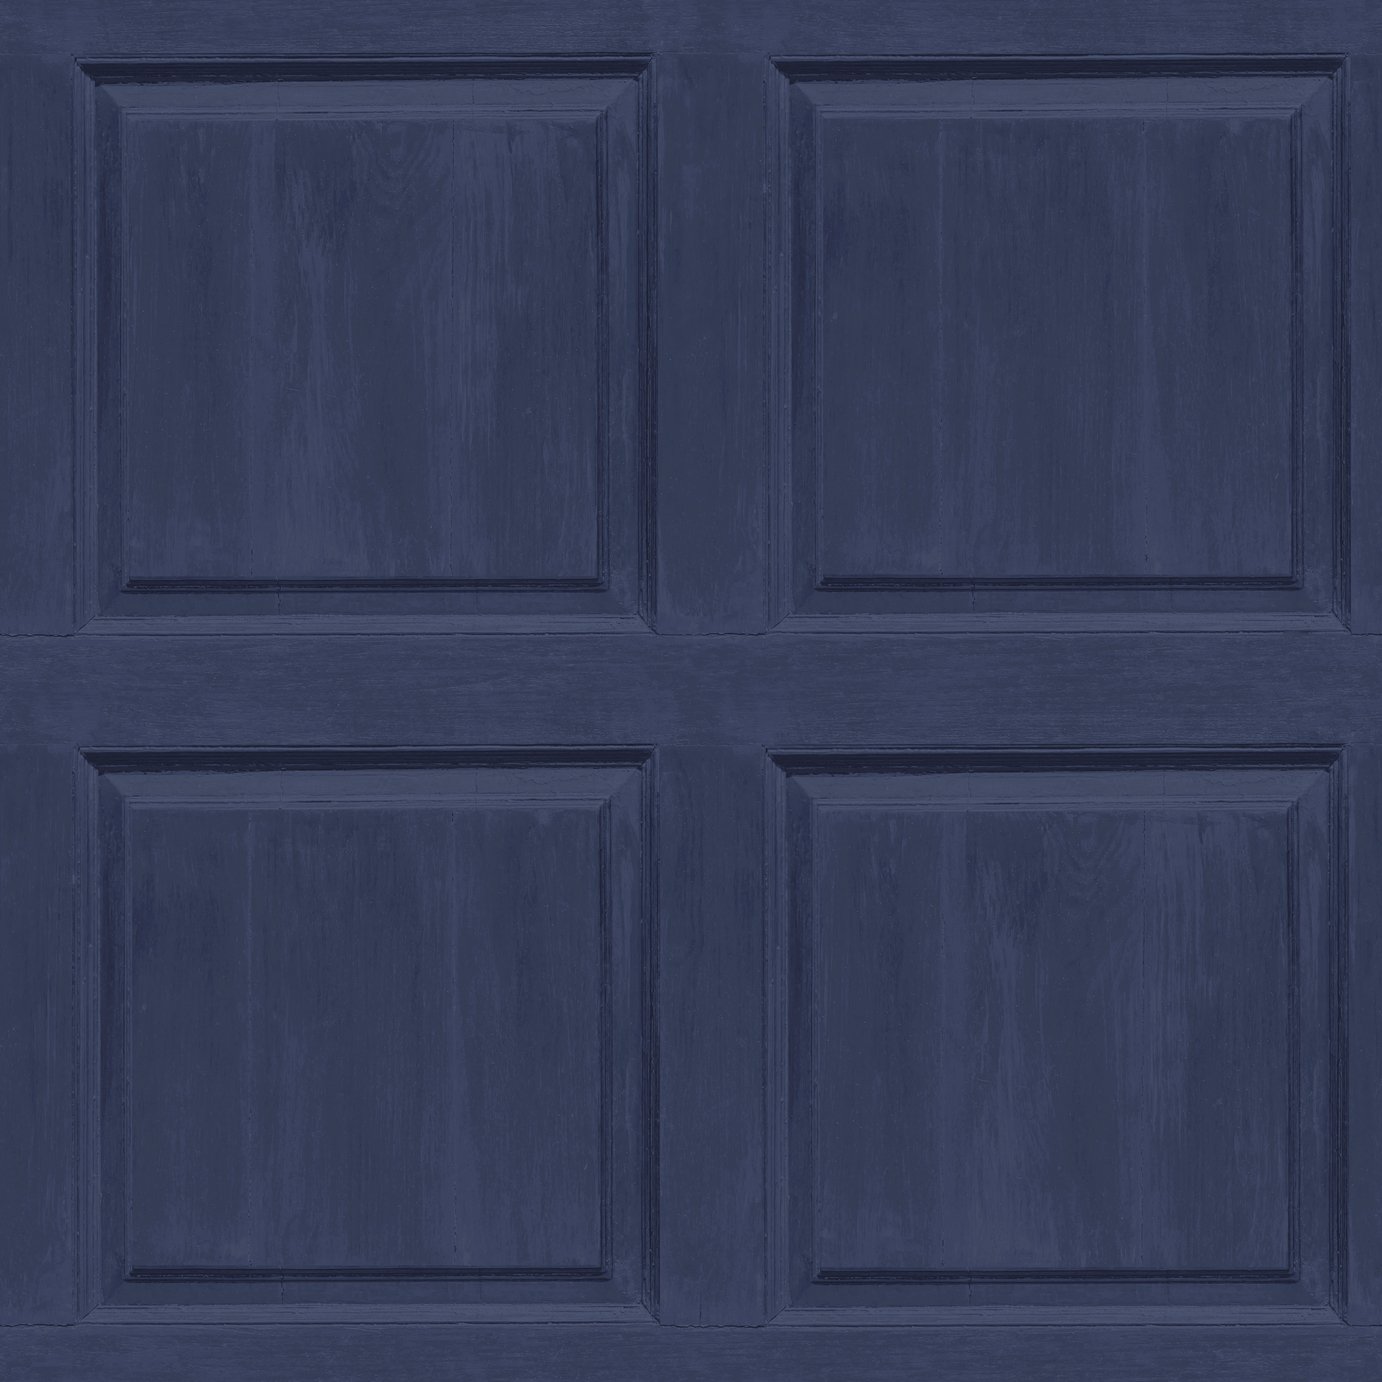 Arthouse Washed Panel Wallpaper - Navy